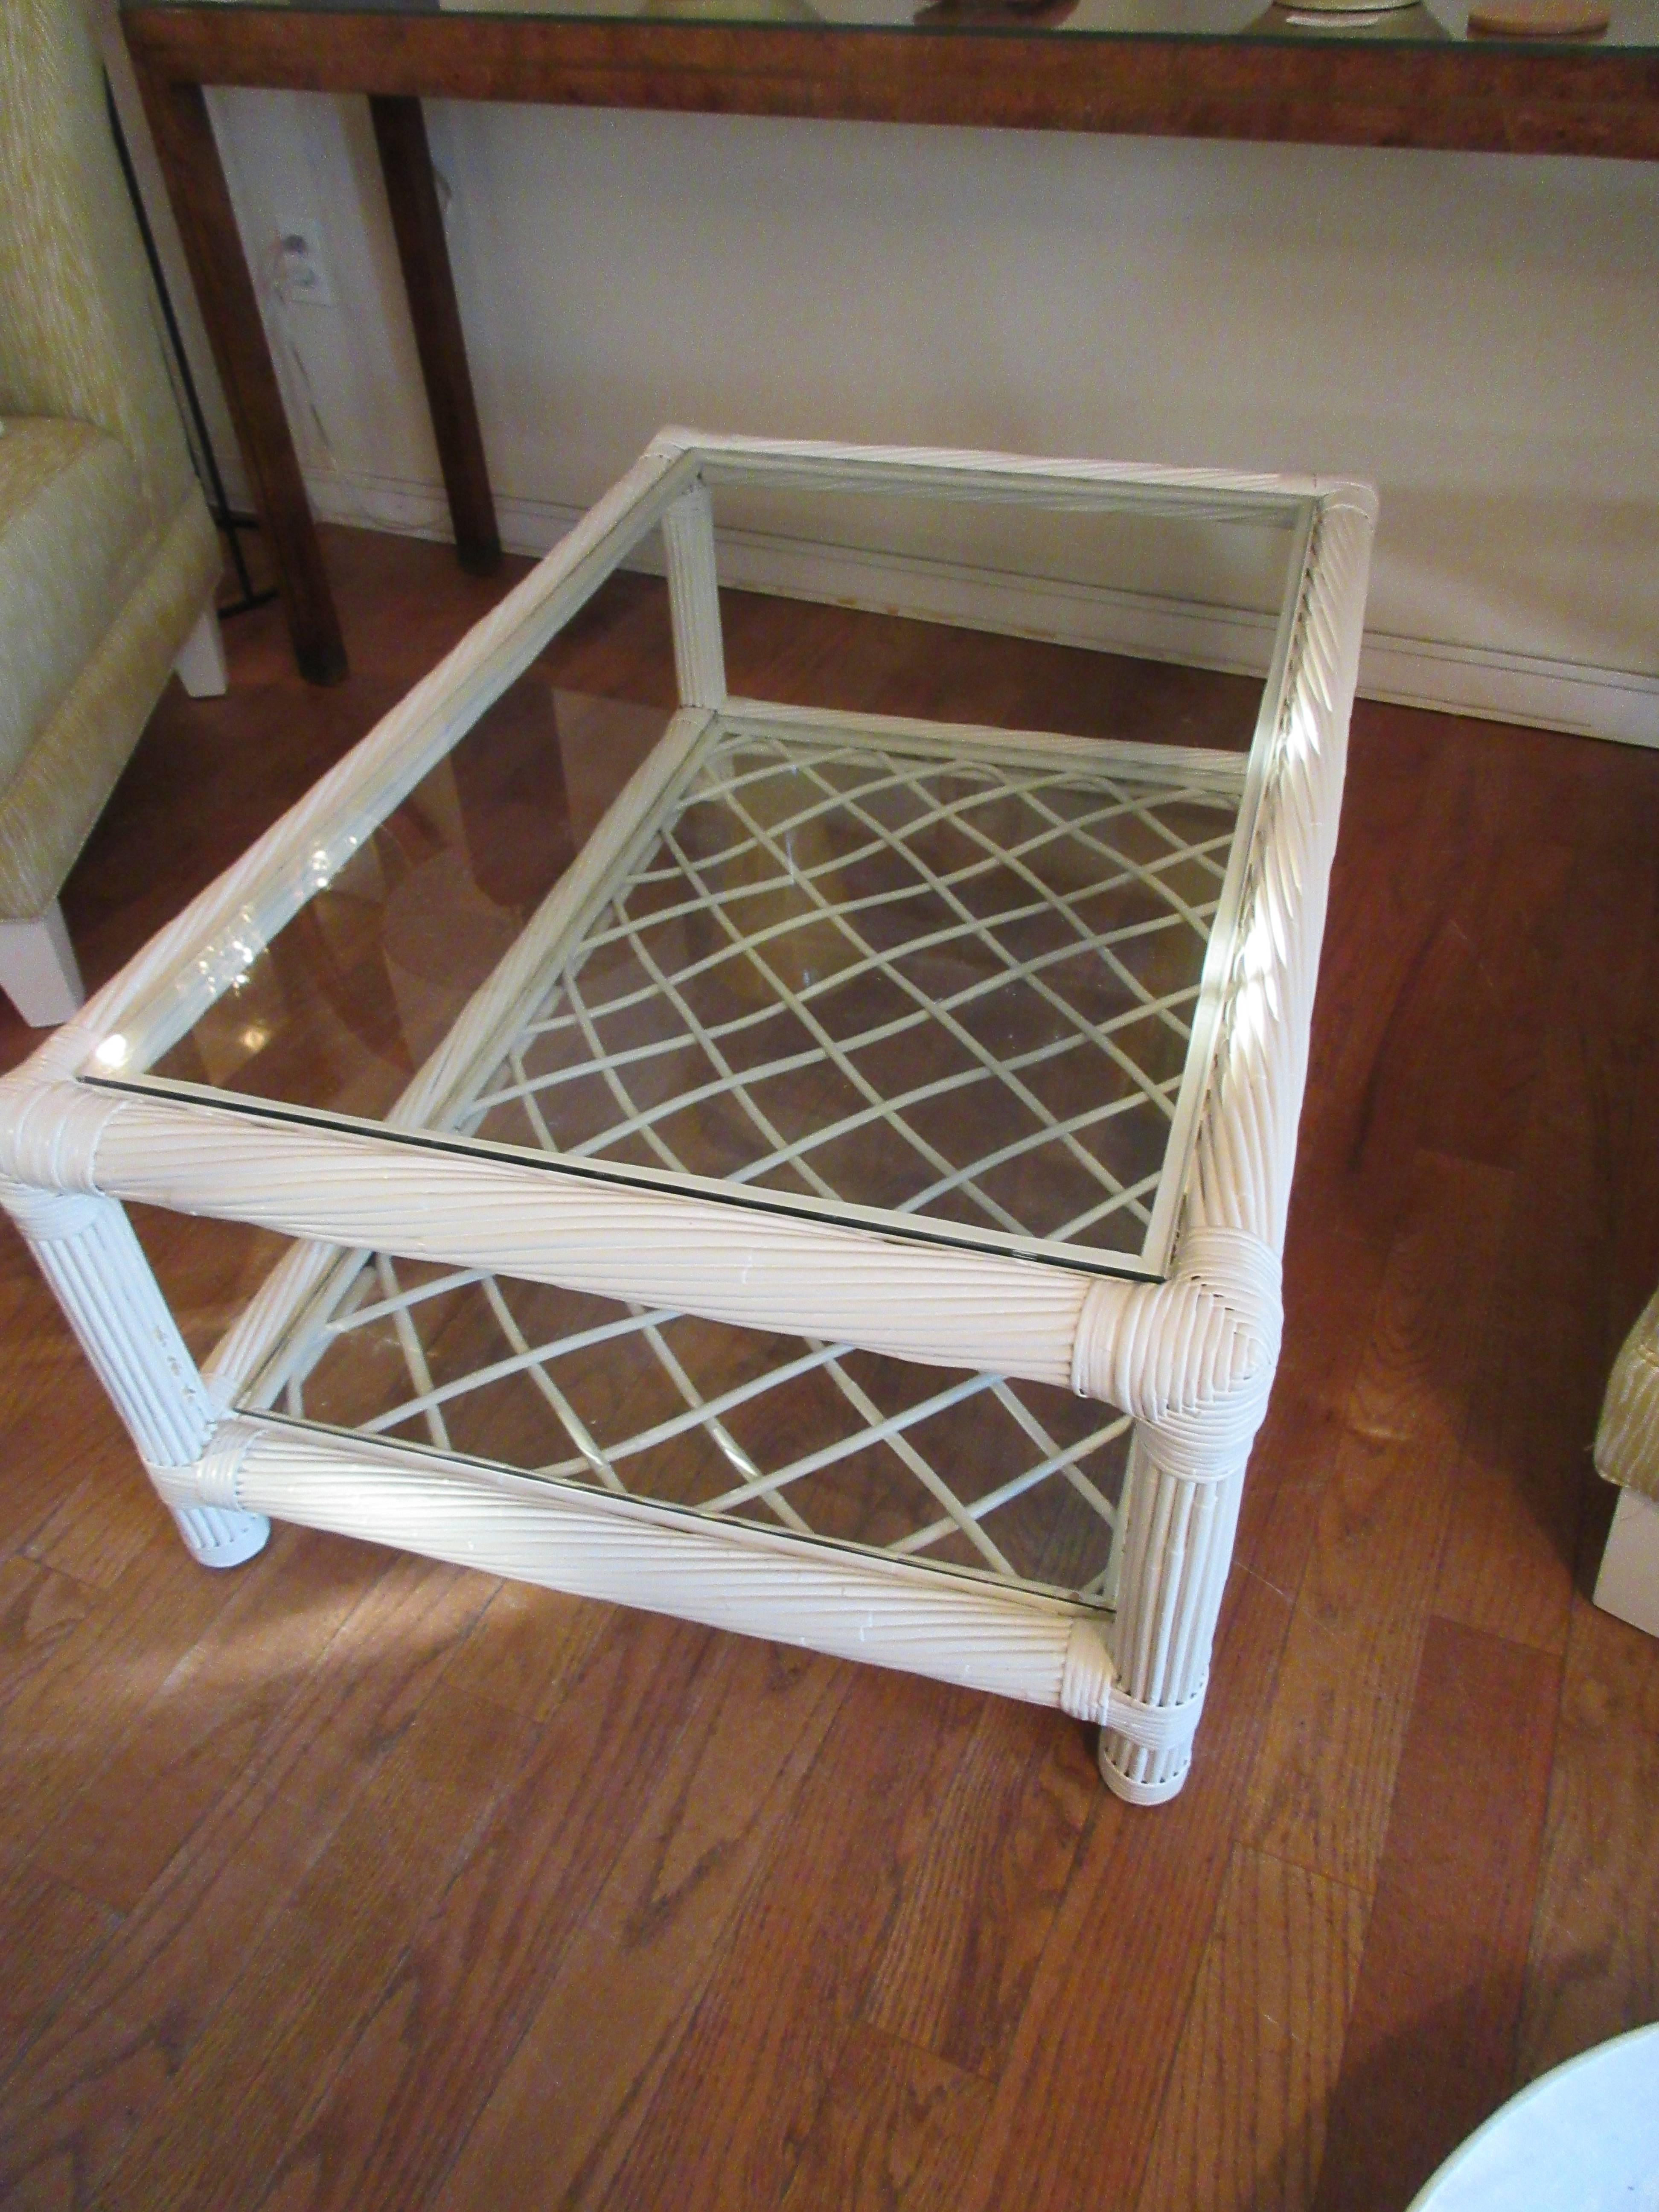 A Ficks reed painted bamboo coffee table. Two levels with glass inserts, lattice work on second level. Restored condition, painted in an oatmeal beige.
Excellent condition.